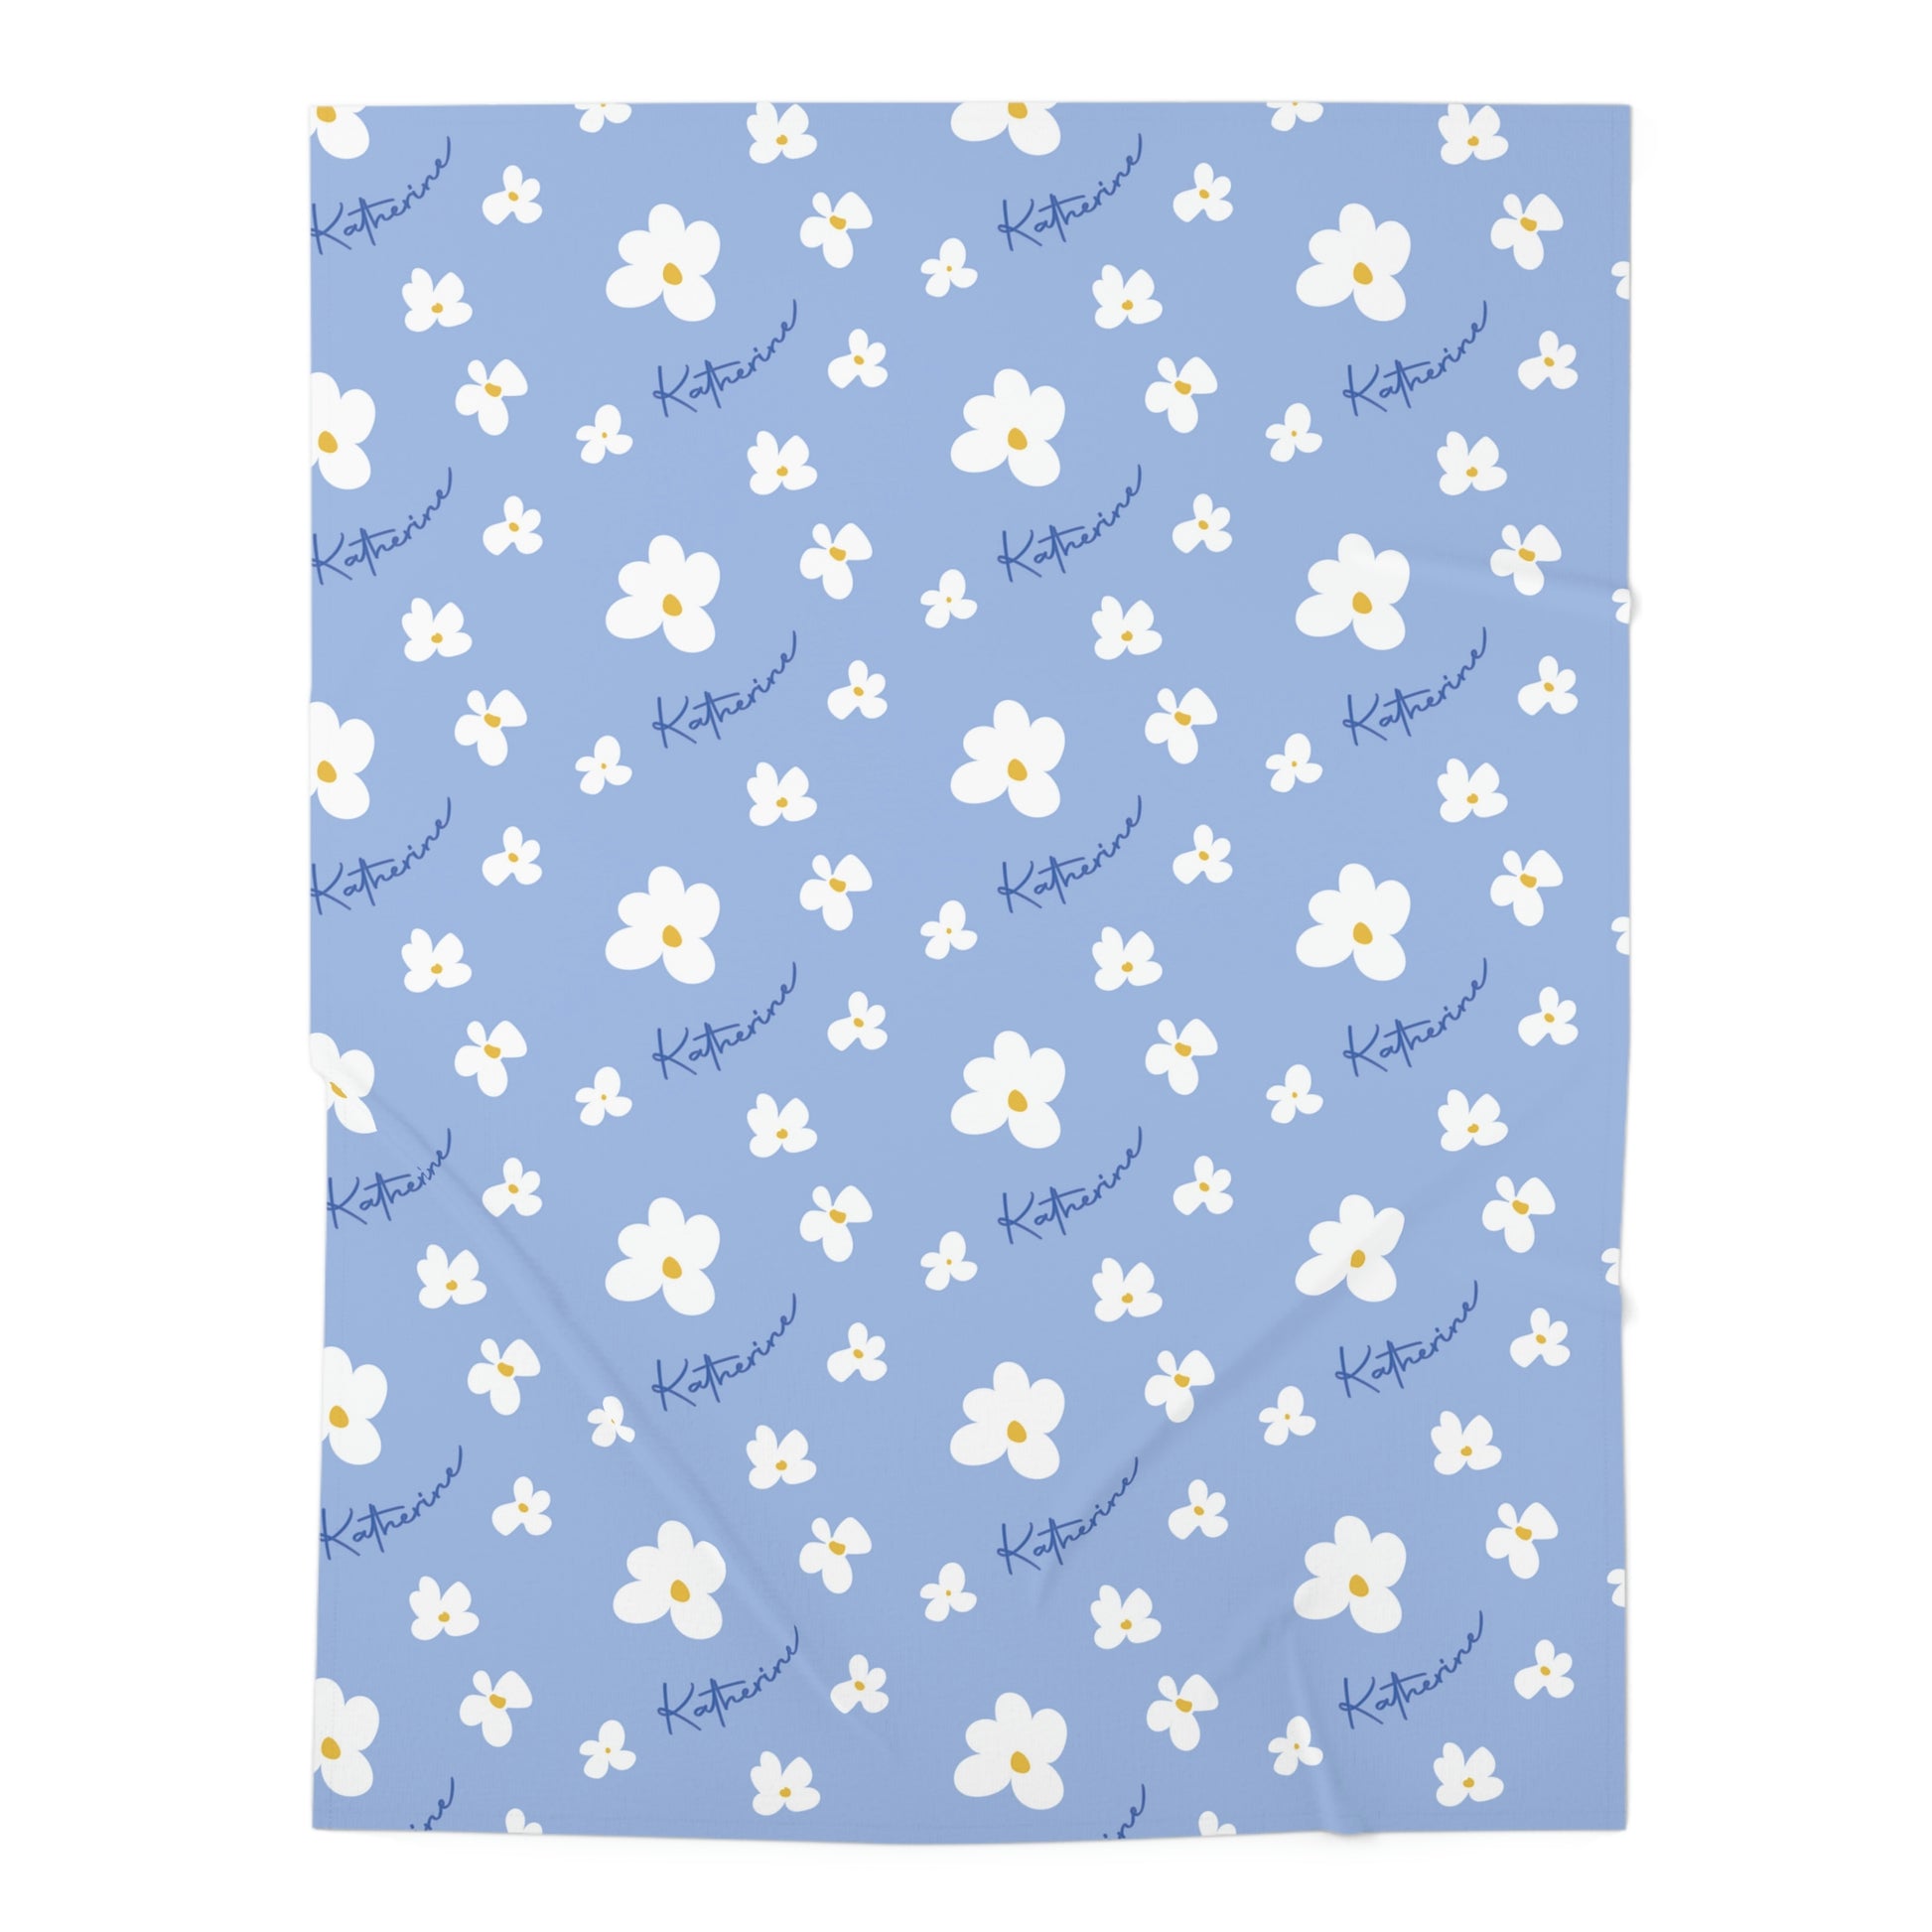 Jersey personalized baby blanket in blue daisy pattern hung over side of white crib